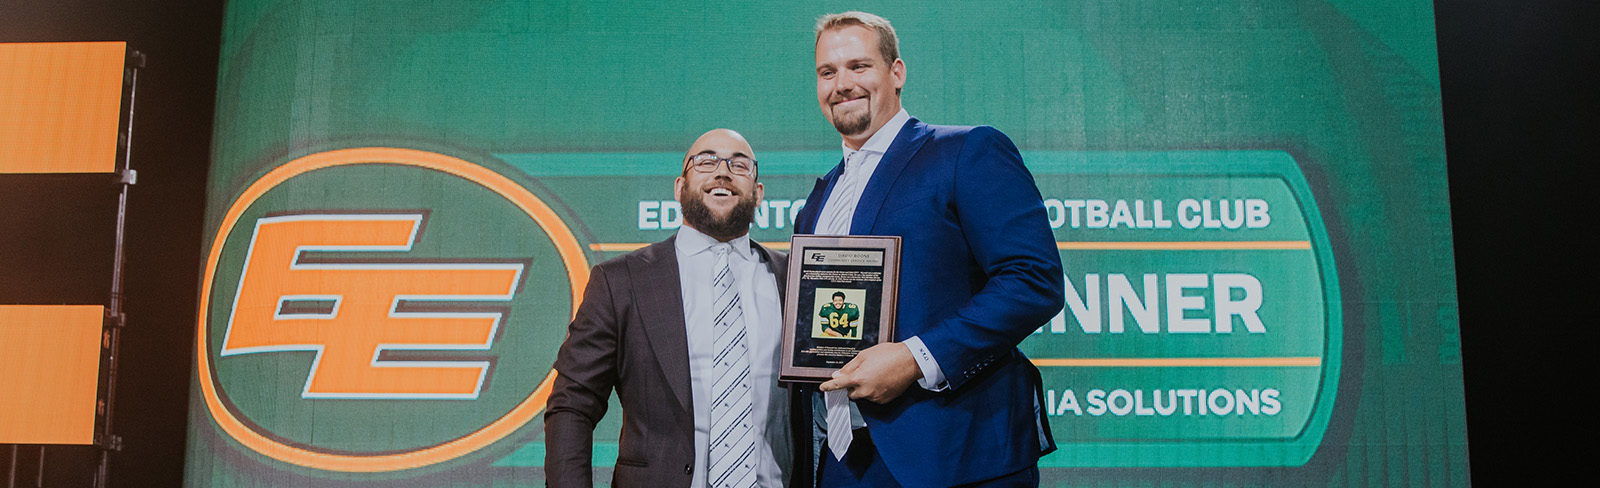 O'Donnell accepting his 2019 David Boone Award from Ryan King, who is also a two-time recipient of the prestigious award. Photo credit: Edmonton Elks.